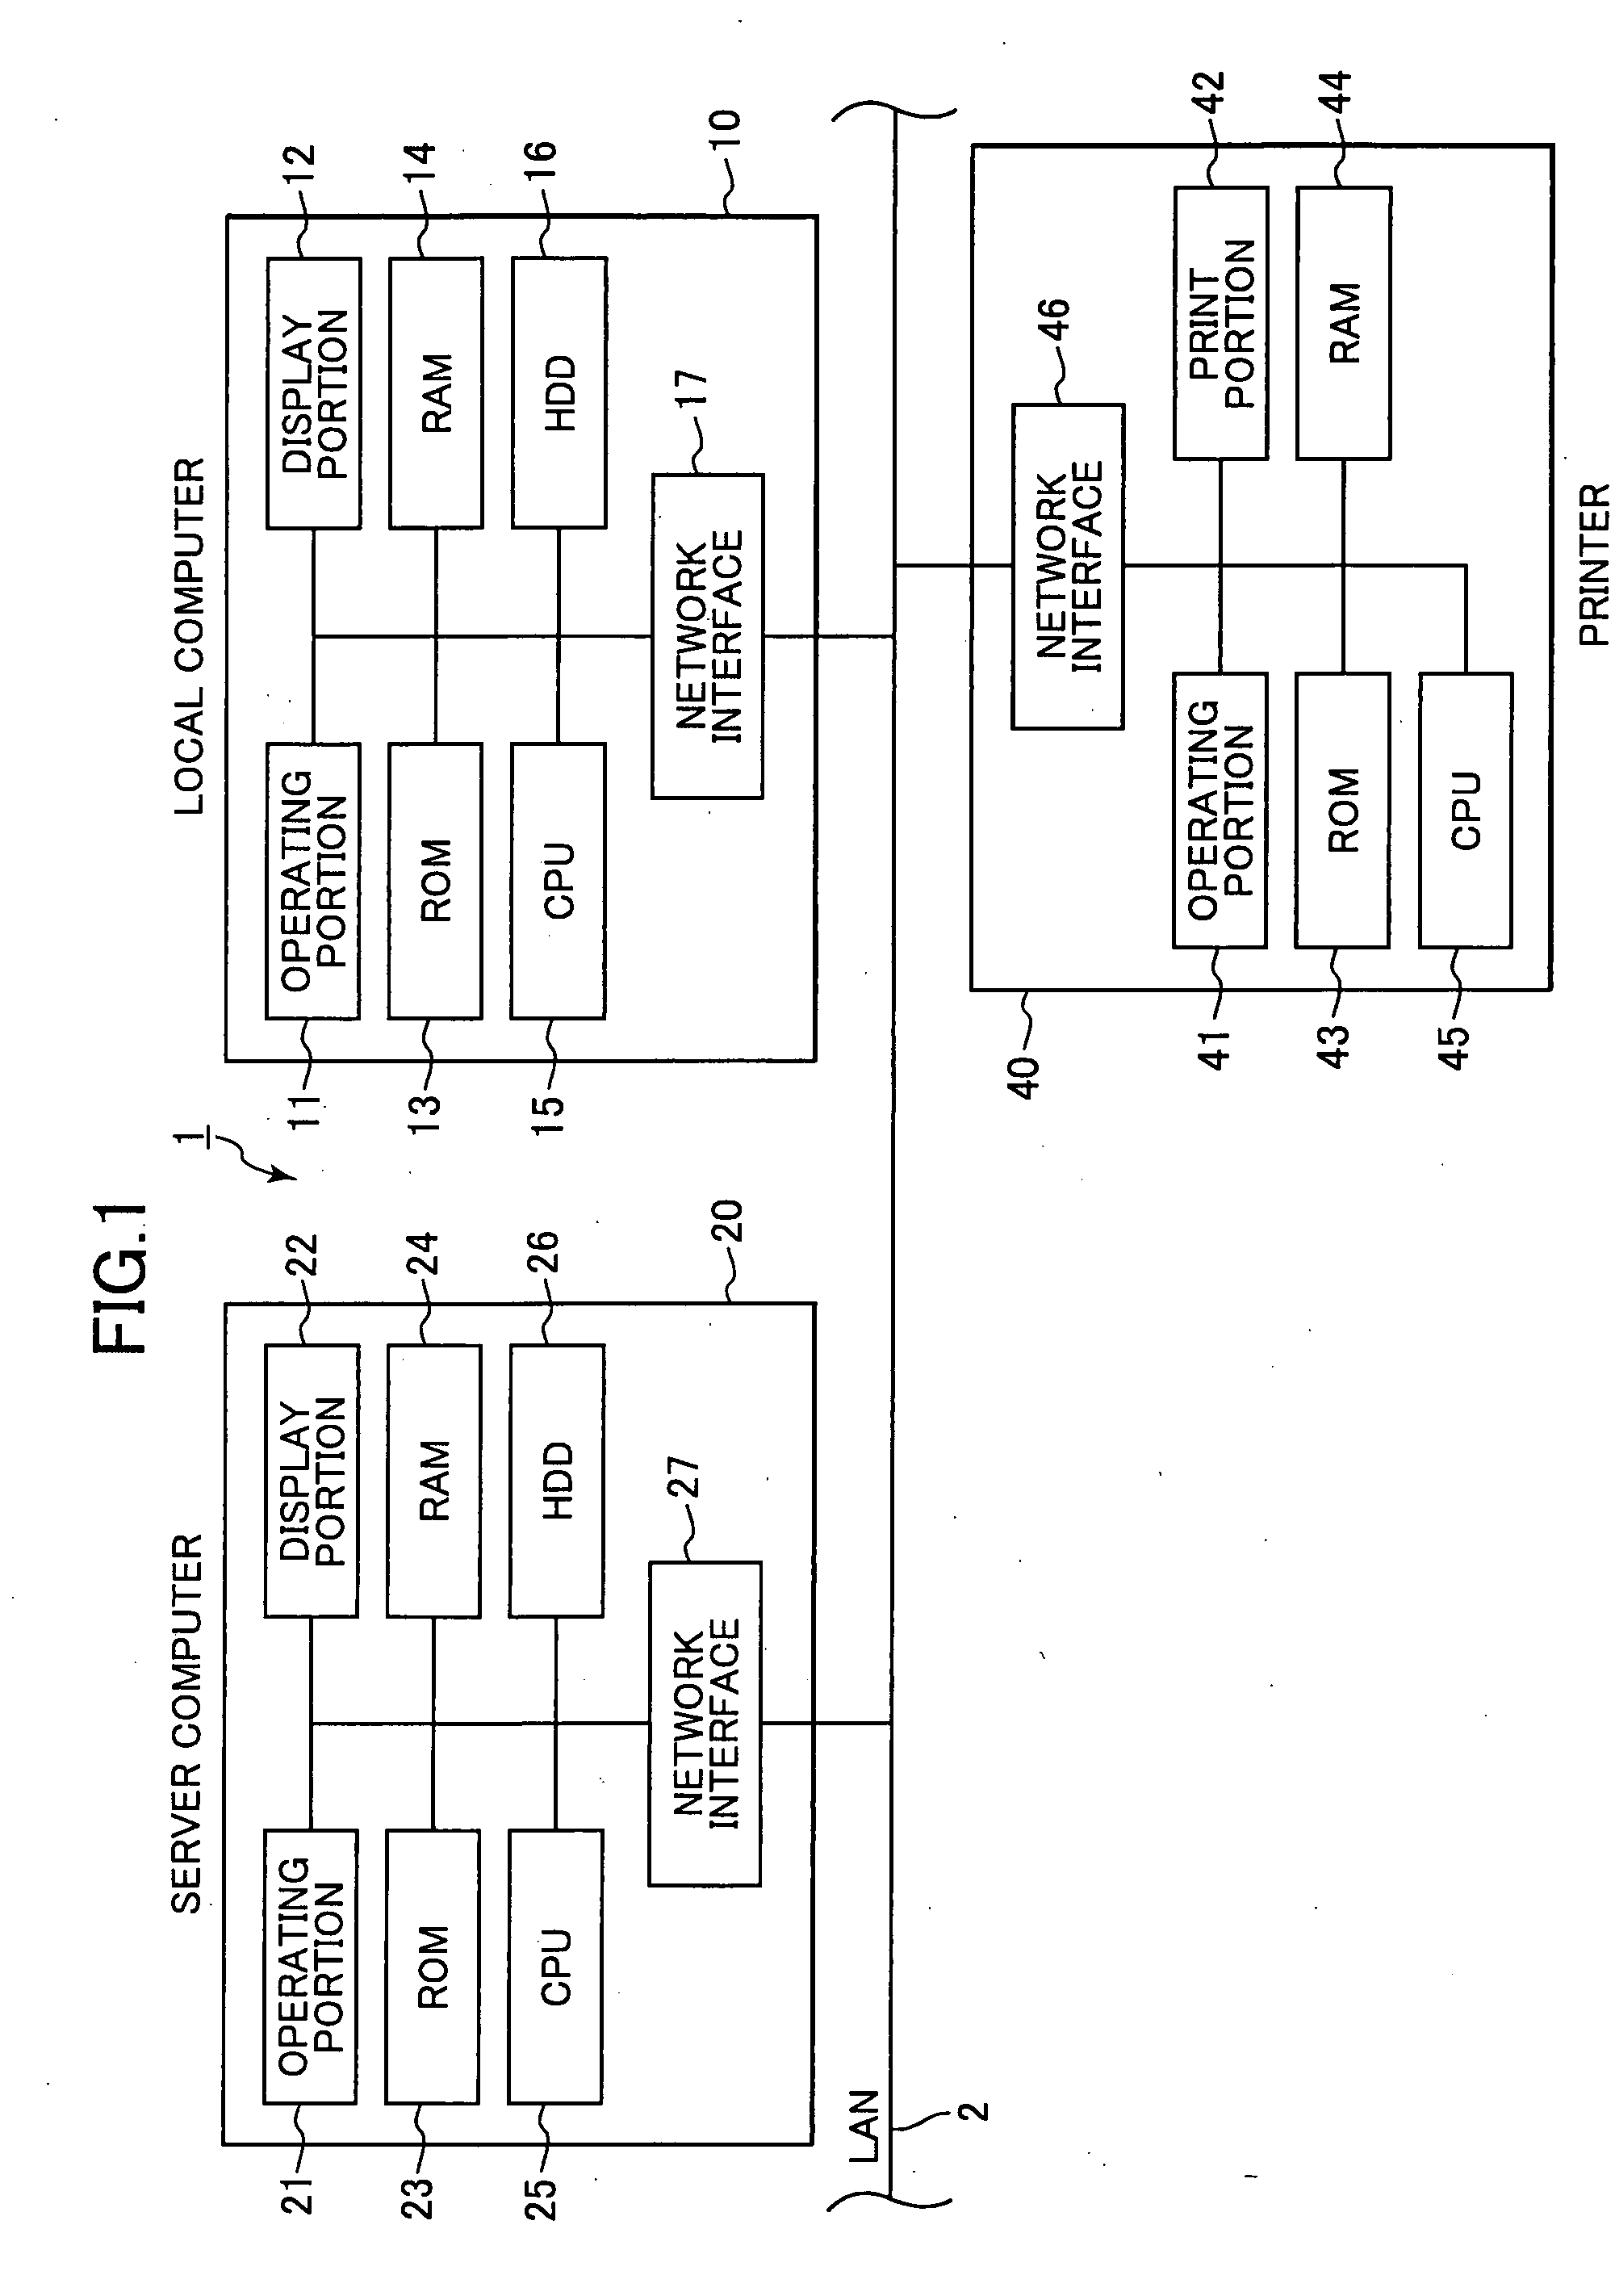 Image forming system having reprint function